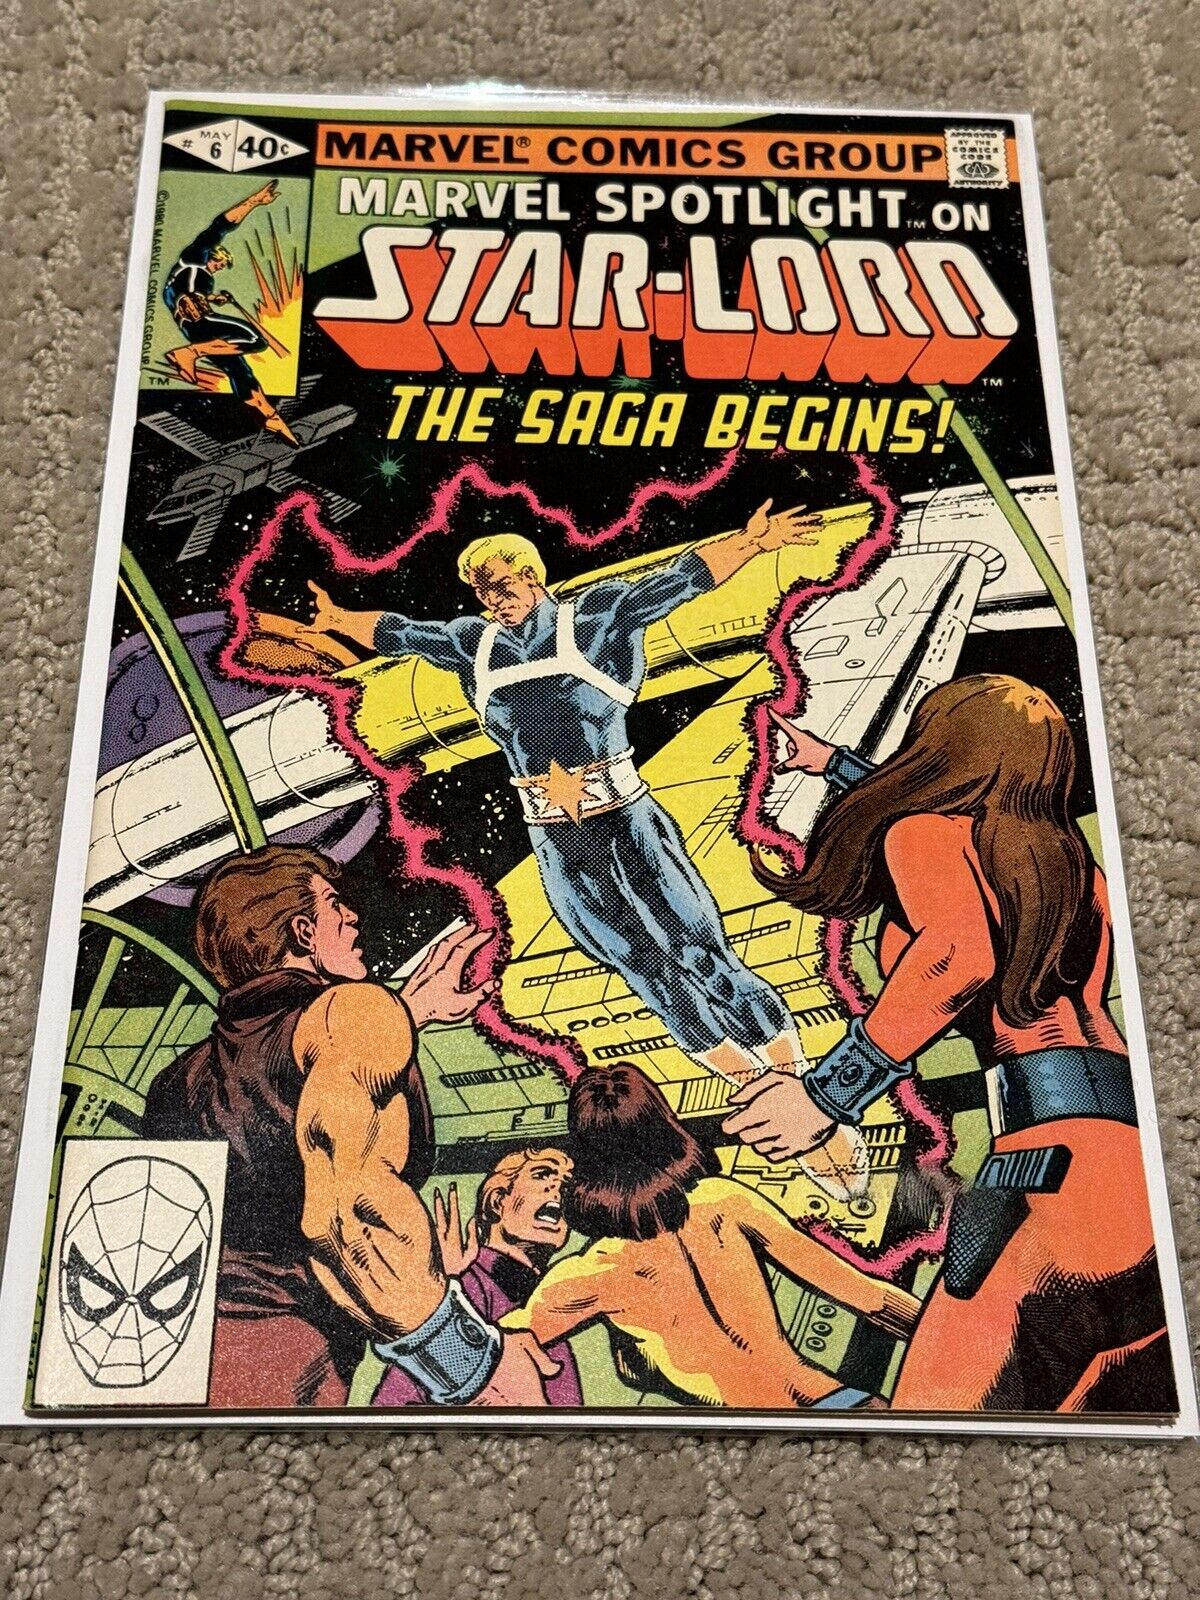 STAR-LORD Marvel Spotlight Comic No. 6 May 1980 1st Appearance Star-Lord FN/VF